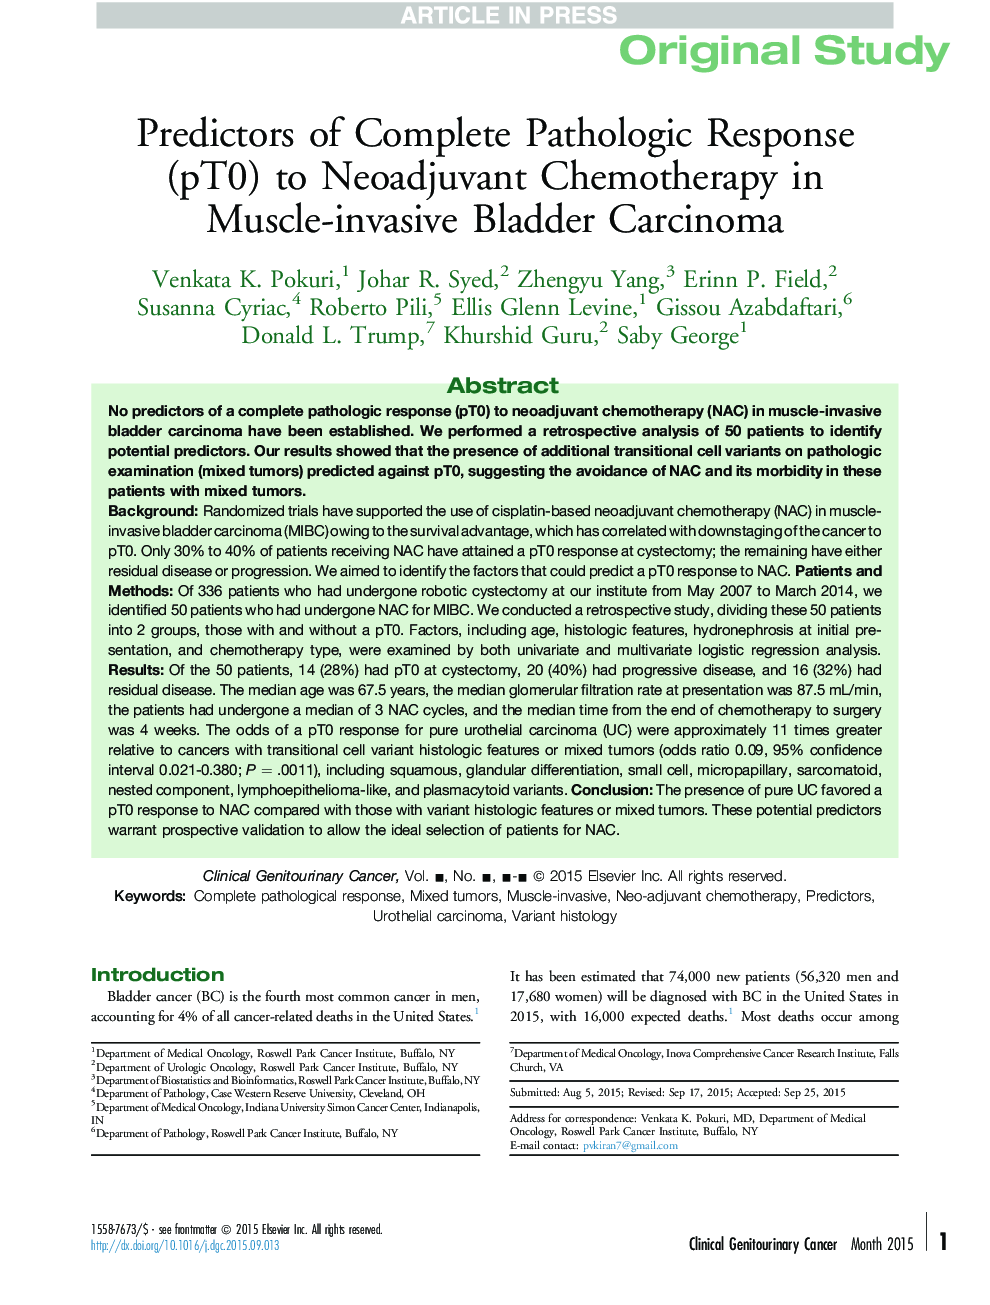 Predictors of Complete Pathologic Response (pT0) to Neoadjuvant Chemotherapy in Muscle-invasive Bladder Carcinoma